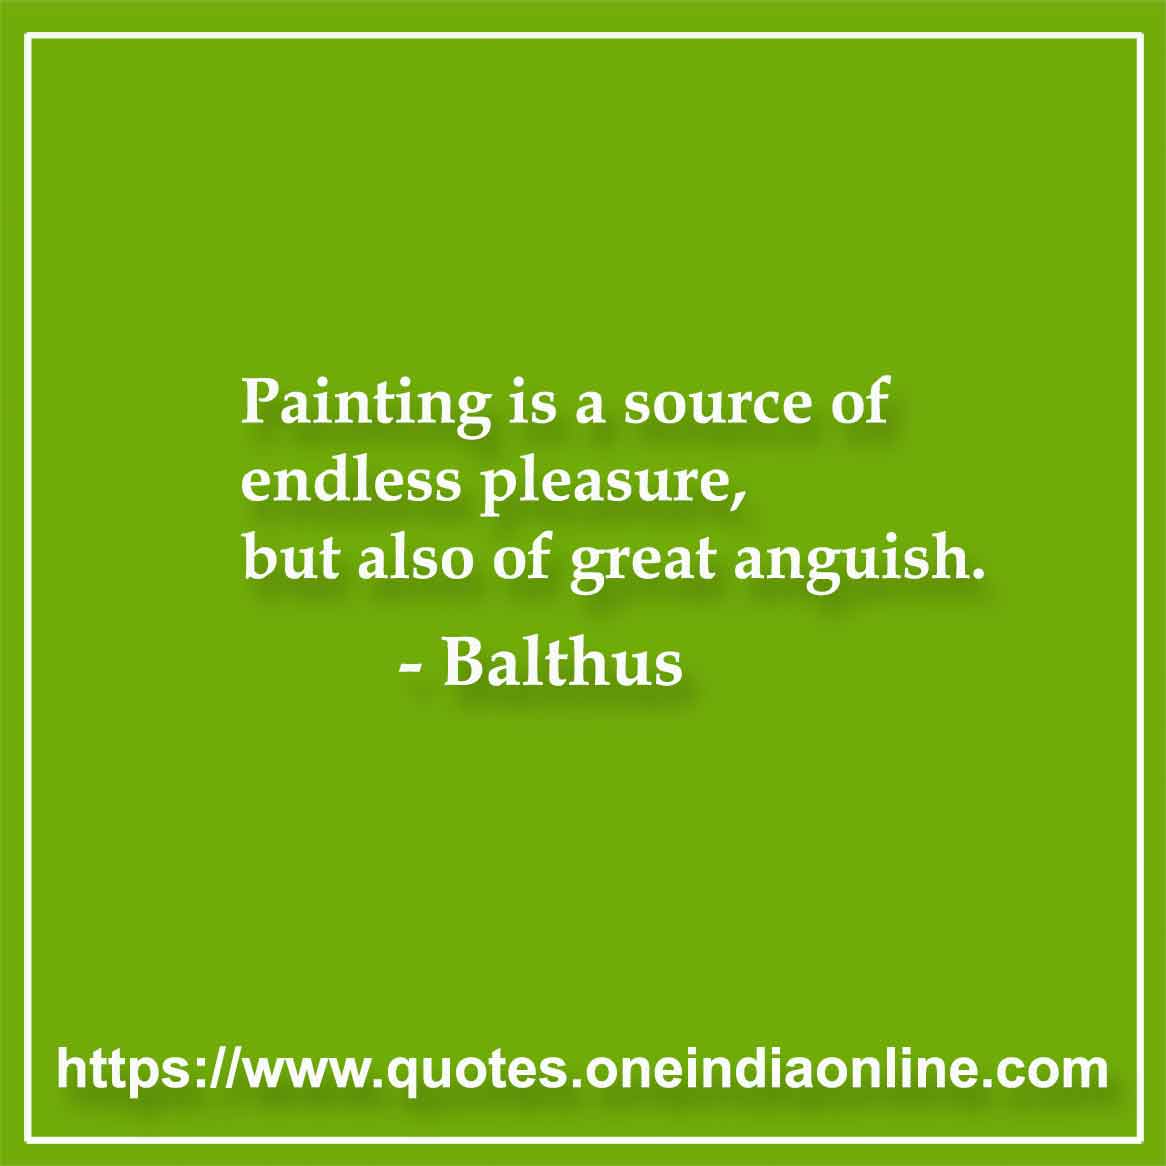 Painting is a source of endless pleasure, but also of great anguish. 

- Balthus